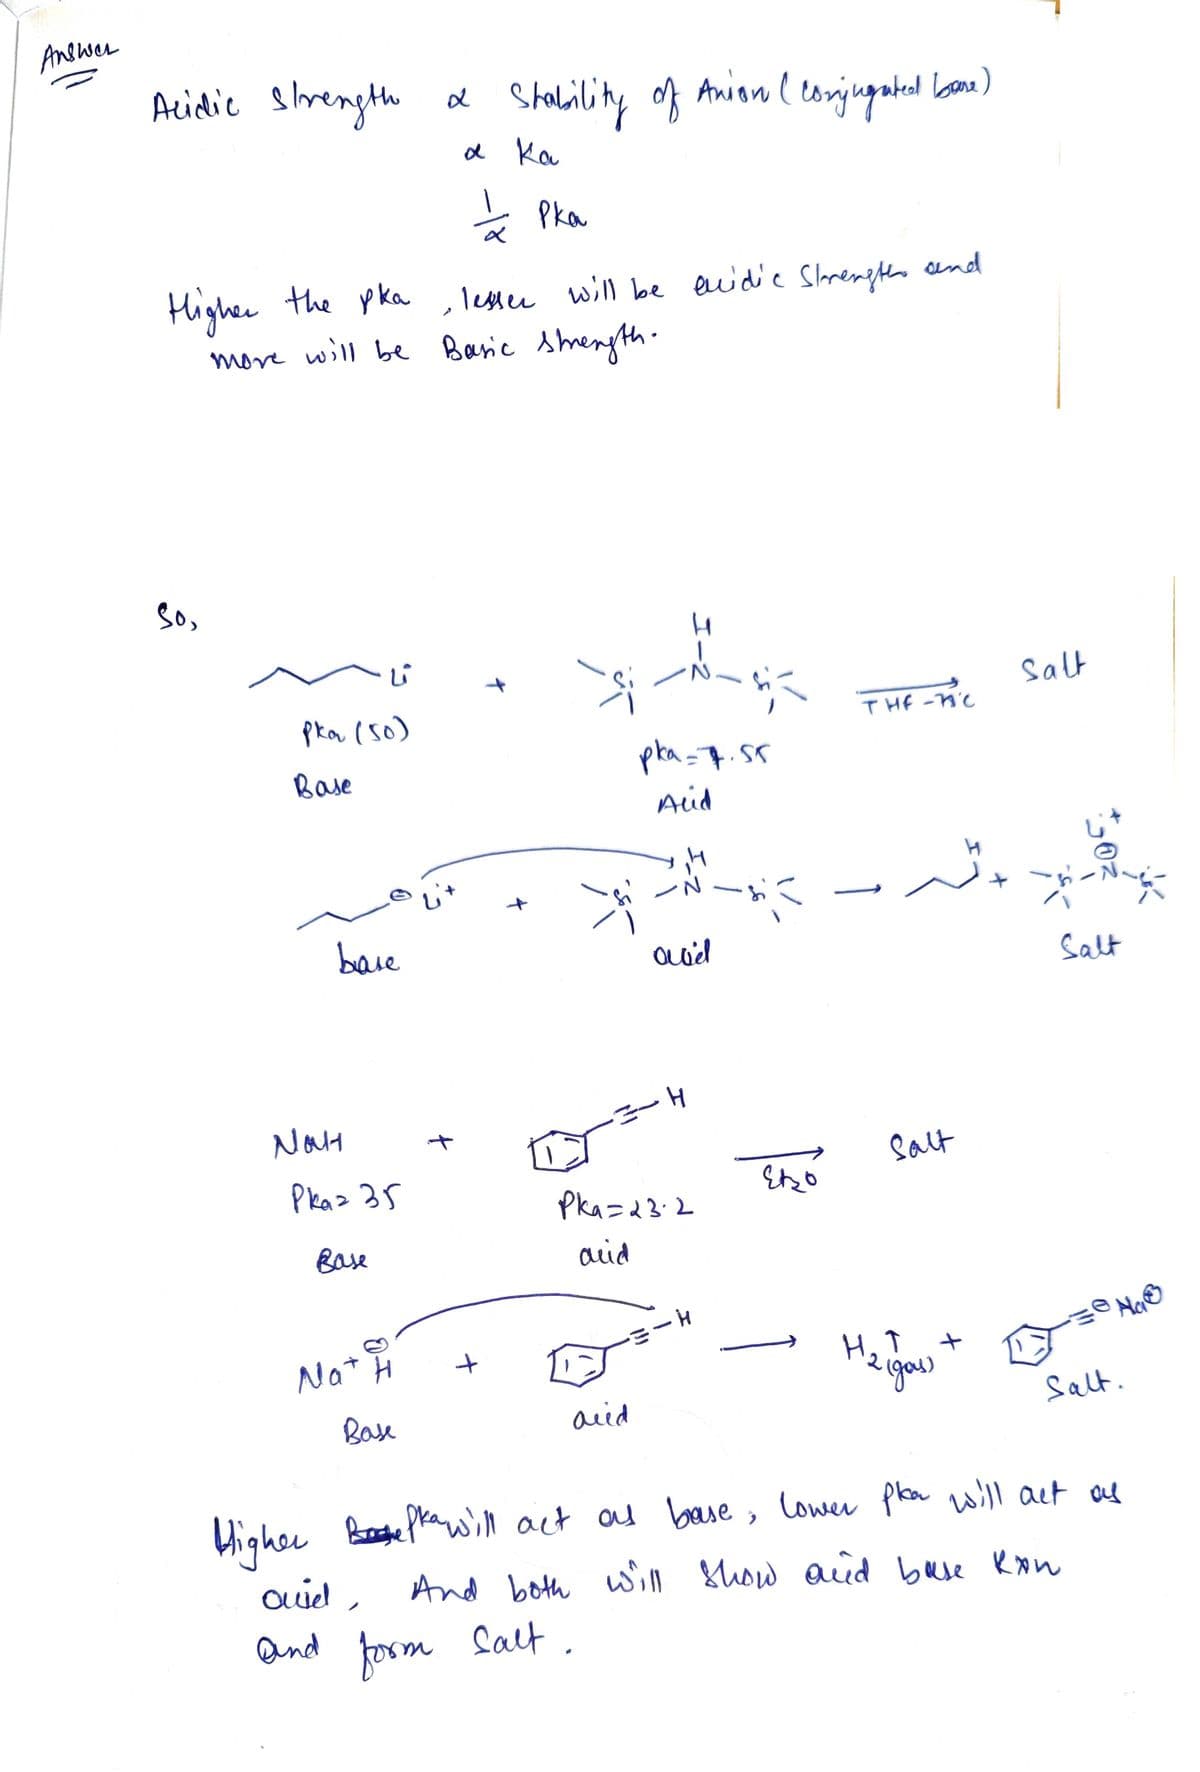 Answer
Acidic strength &
So,
ů
pka (50)
Base
base
Higher the pka, lesser will be excidic Strengths and
more will be Basic Strength.
NOH
Pkaz 35
Base
Stability of Anion ( conjugated bane)
а ка
Nat H
Base
+
2
-18
+
рка
4
•=-H
aiid
ouid,
and form salt.
I-2
pka = 7.55
Acid
H
₁-N-²
adl
Pka=23.2
acid
+==
-н
Ево
THE-11'C
Salt
H.T
2 (gas)
+
Salt
---
02
Salt
Higher Befka will act as base, lower pka will act as
Bokepka
And both will show and base kon
ķ
озенье
Salt.